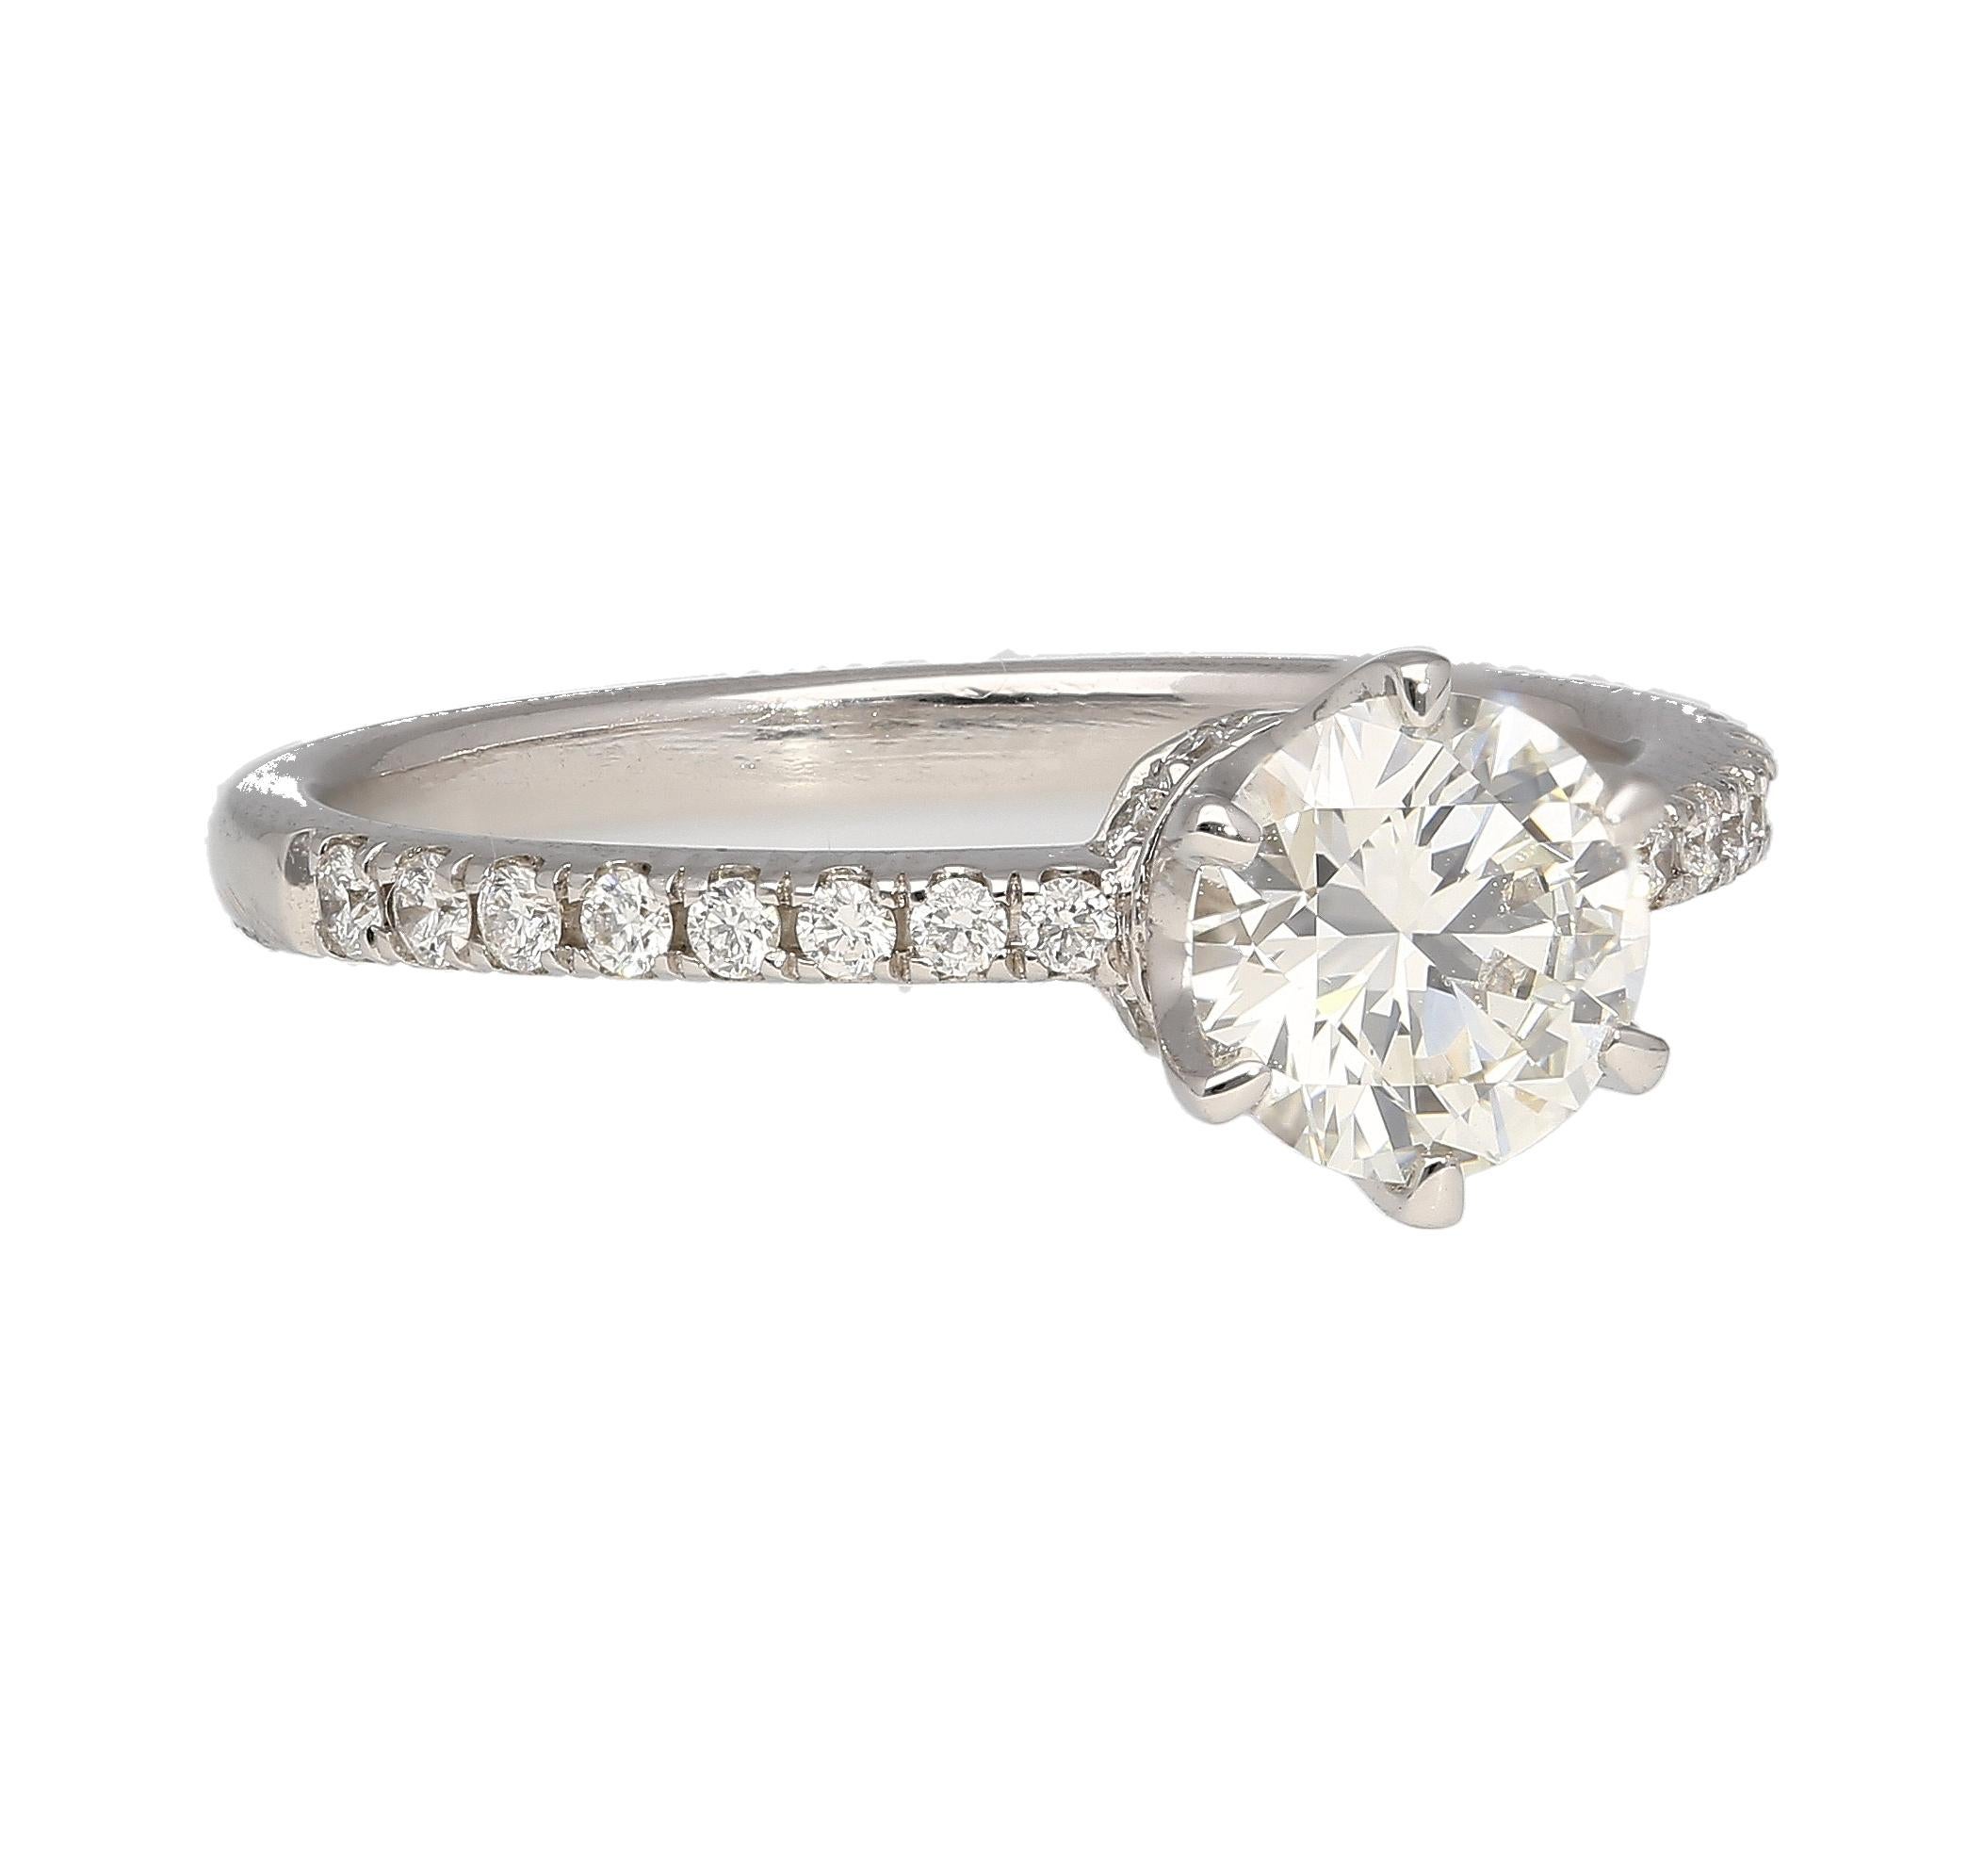 GIA Certified 0.51 Carat Round Cut Diamond Engagement Ring in 18K White Gold. Set in 18k solid white gold with a hidden halo and round cut pave set diamond side stones on the shank. The center stone is 6-prong set, with a stunning crown style basket